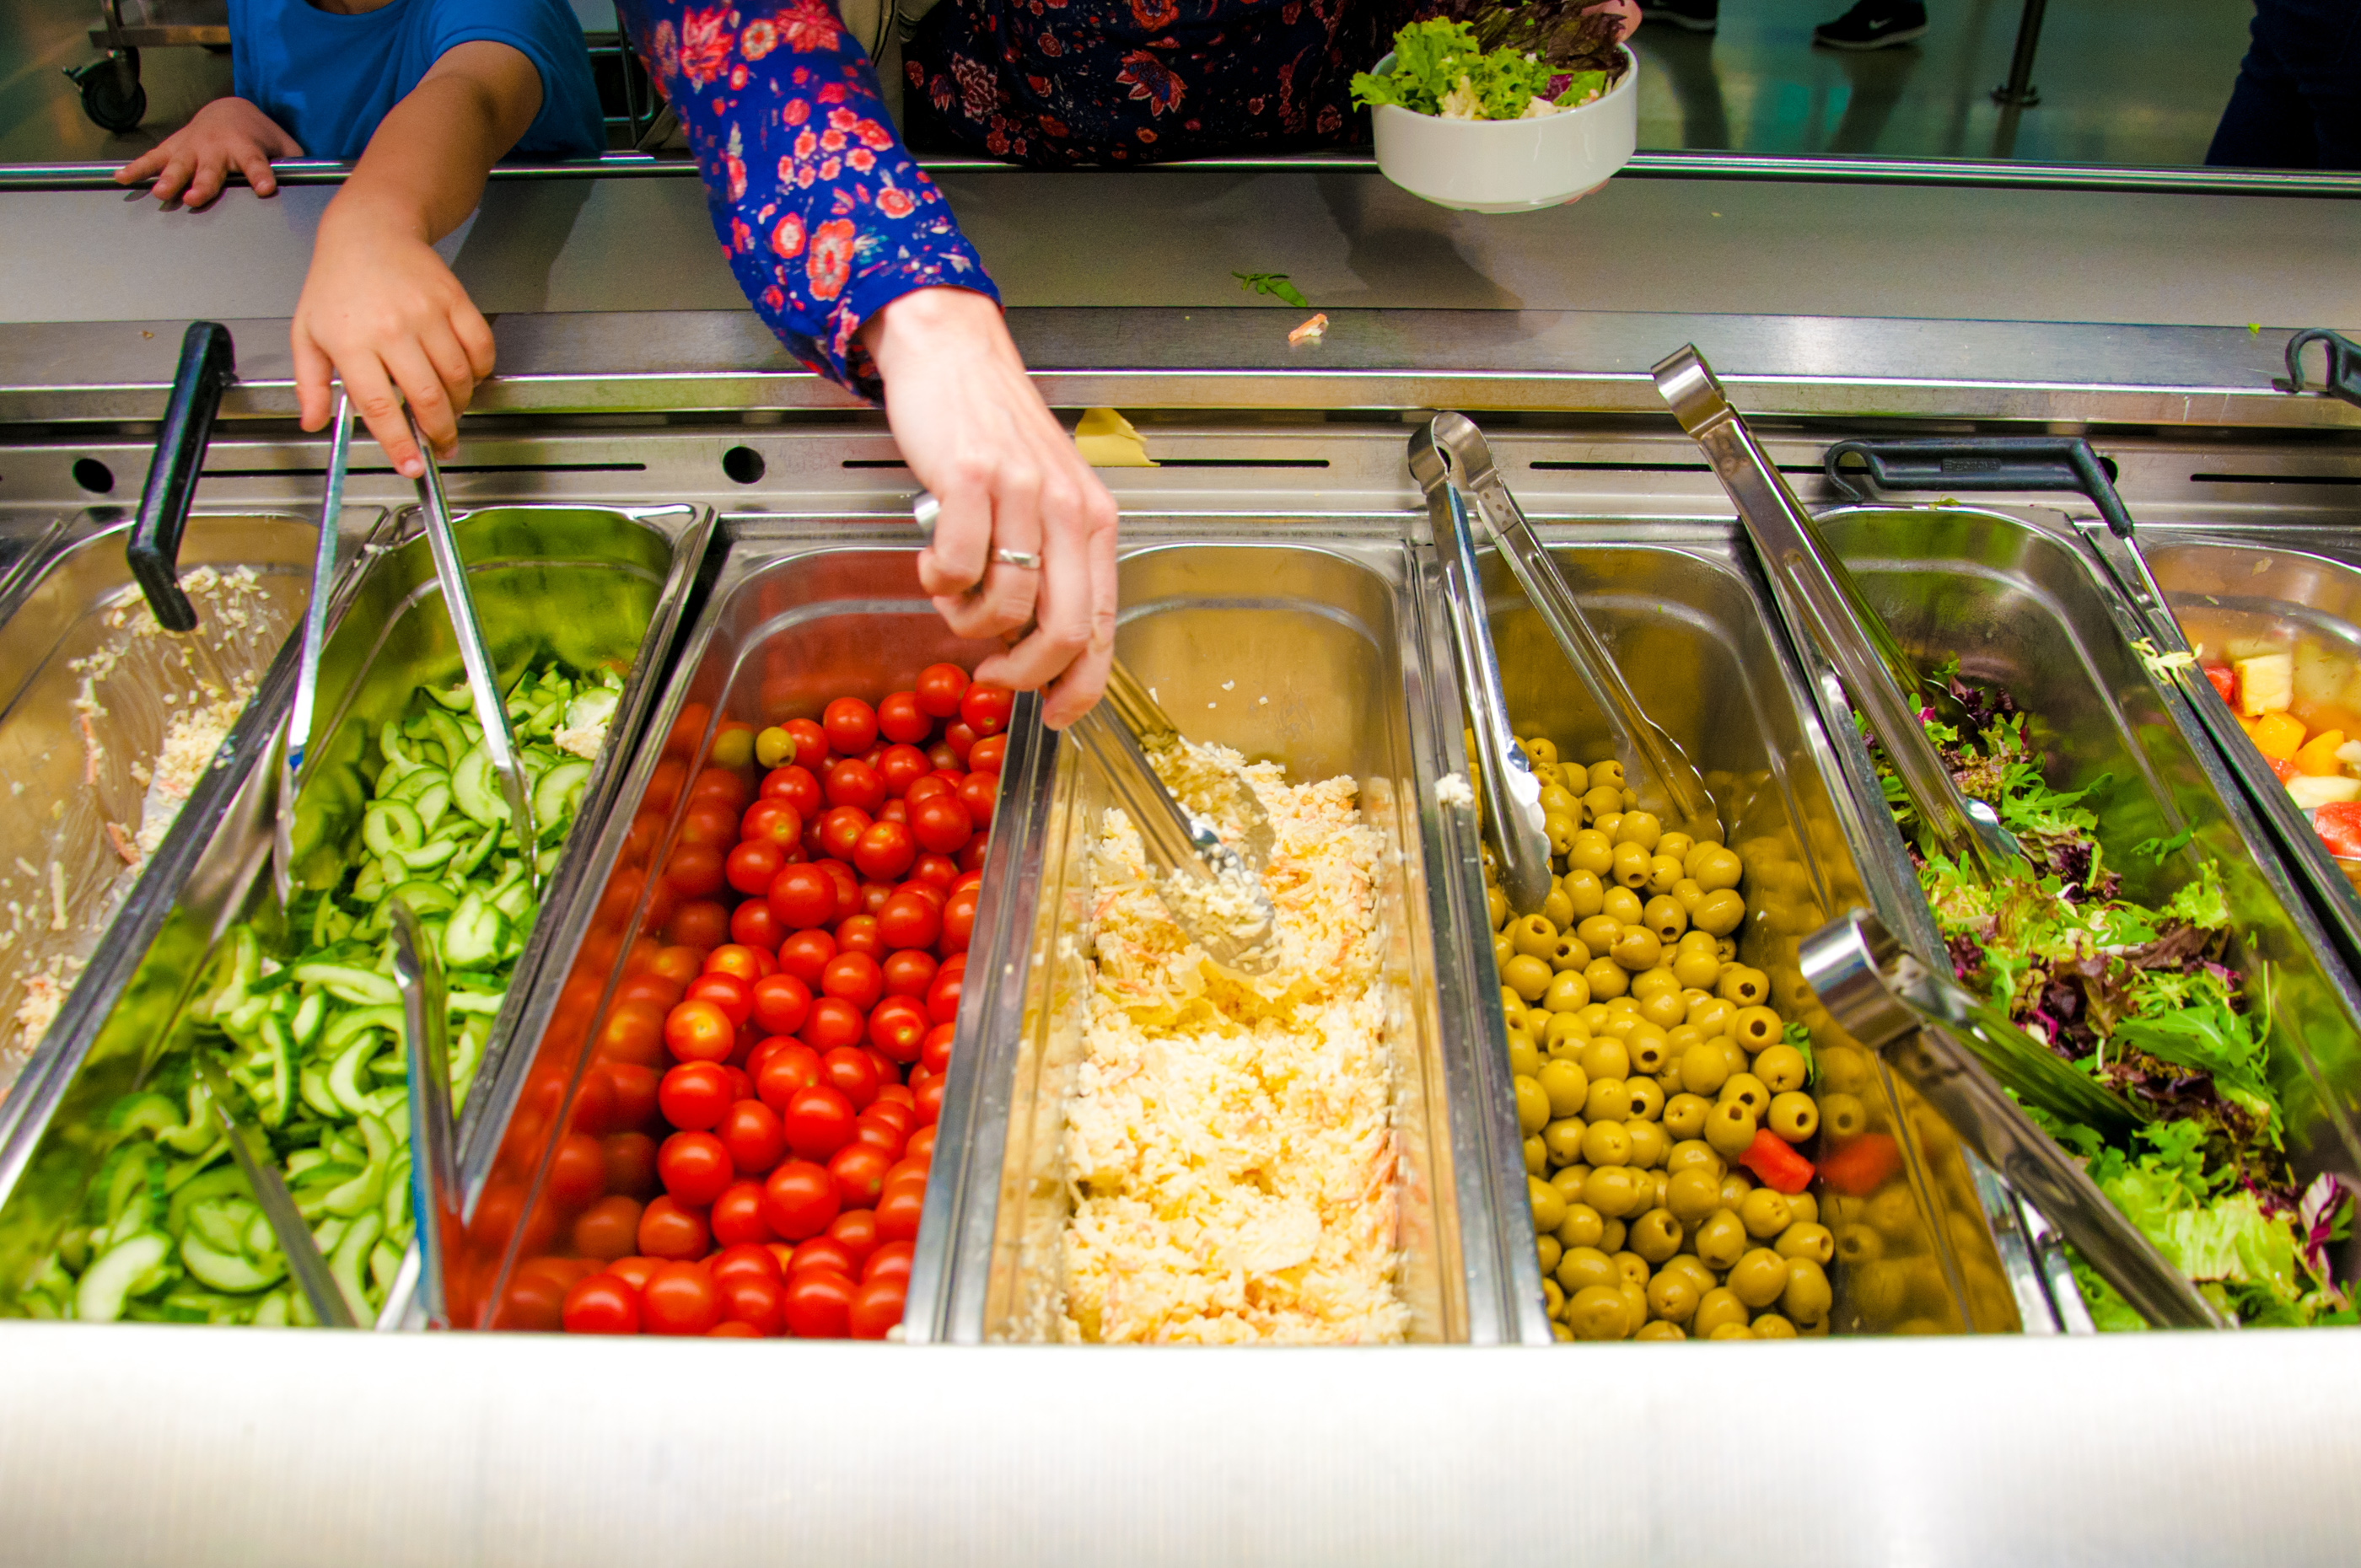 Salad bar with vegetables photo